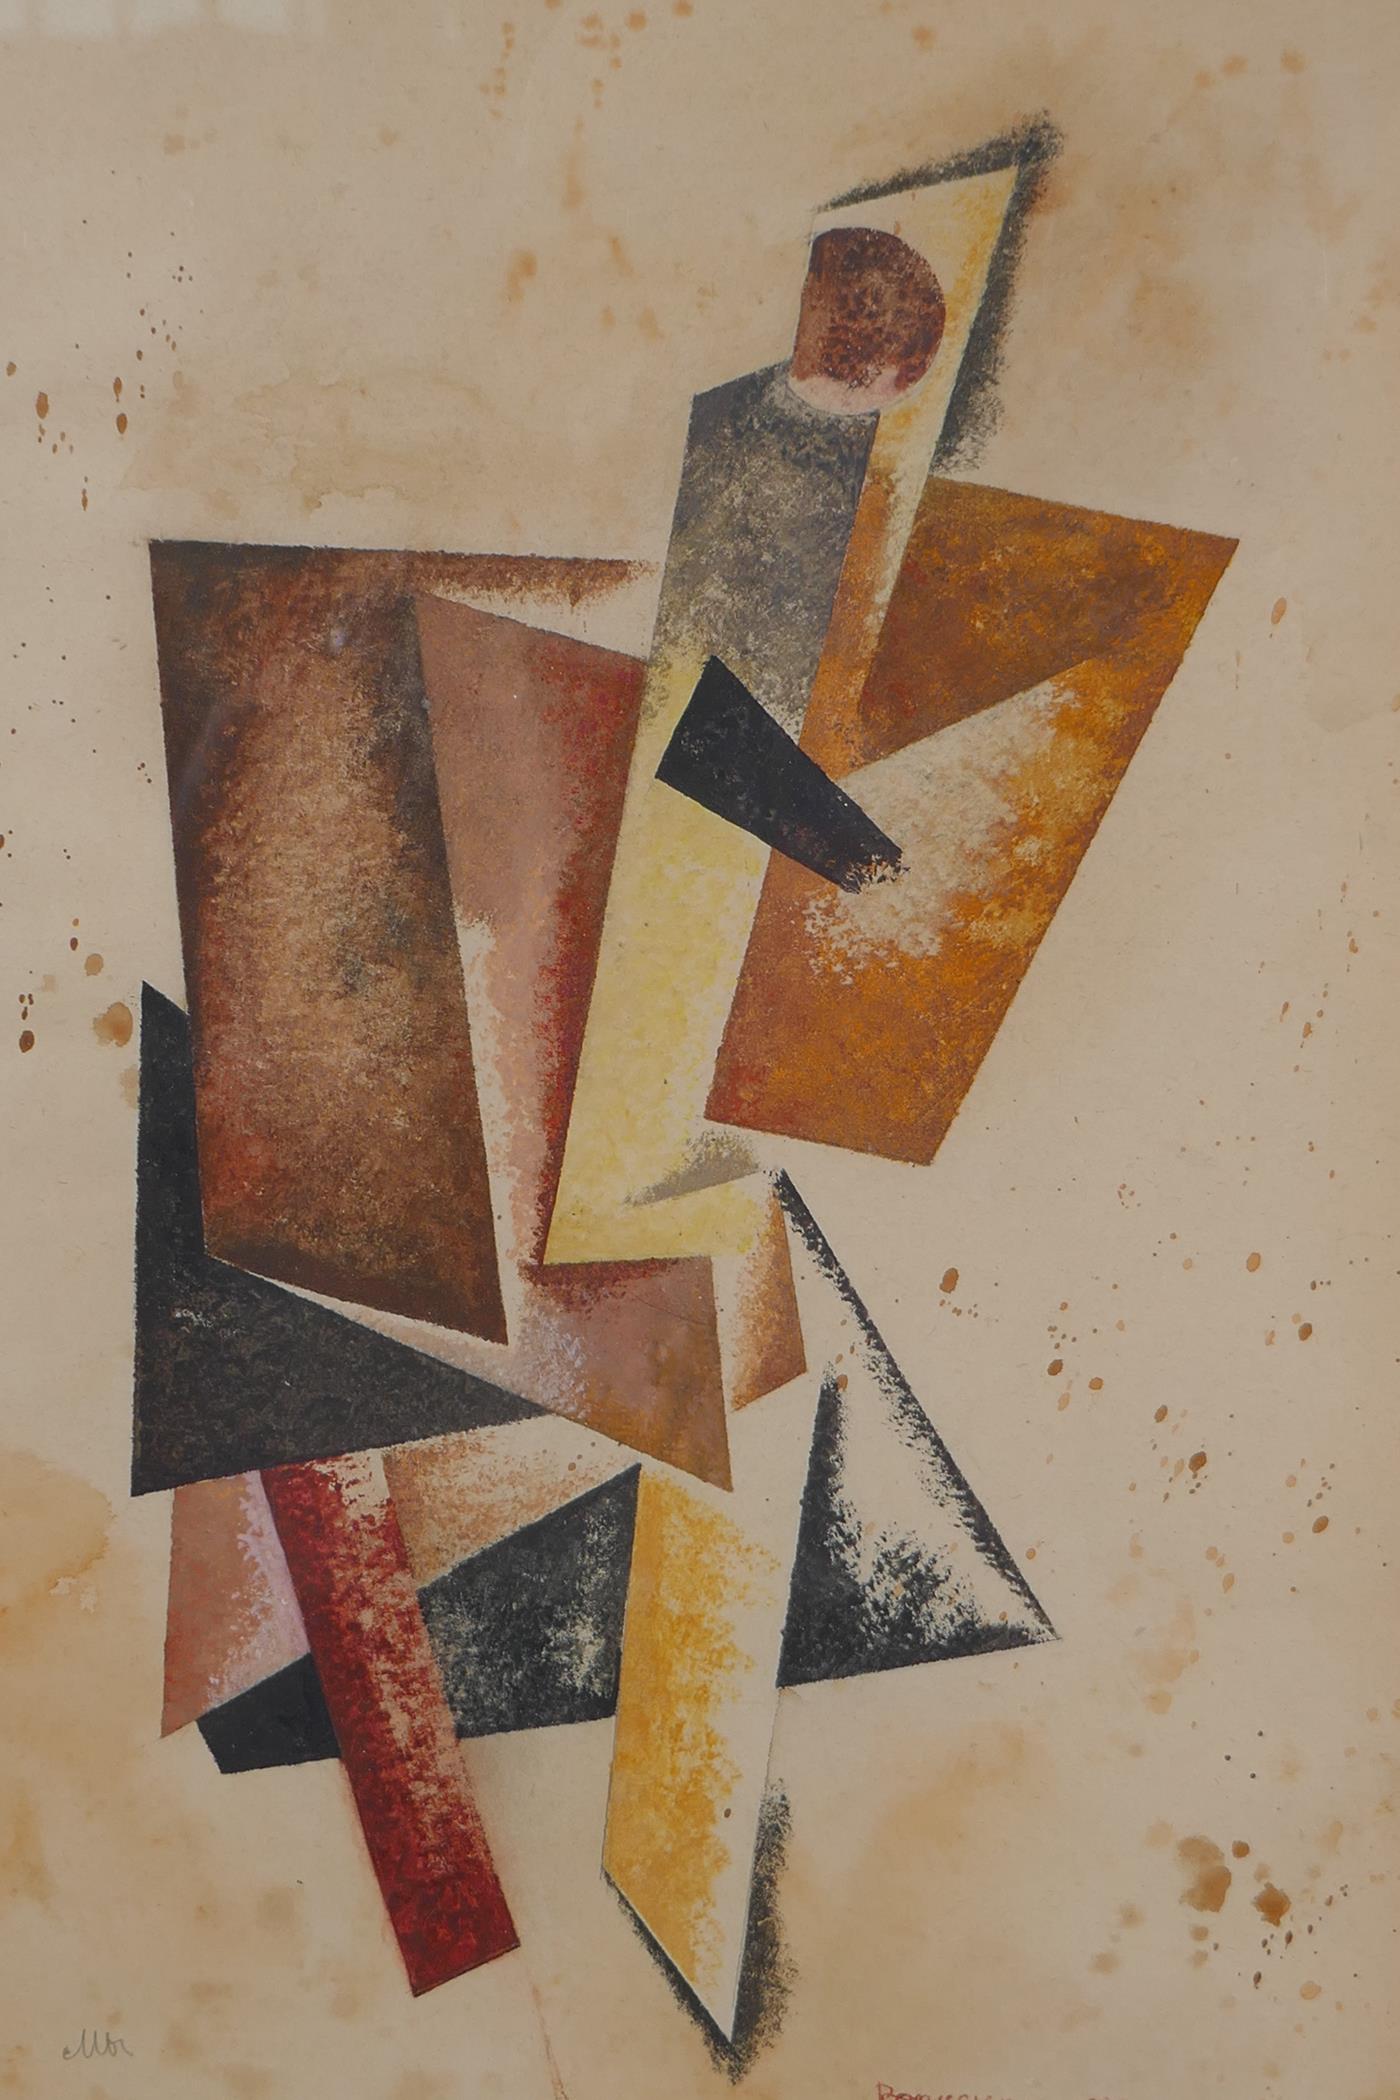 A Russian Constructivist abstract figure, indistinctly signed and dated 1920?, watercolour, 20 x